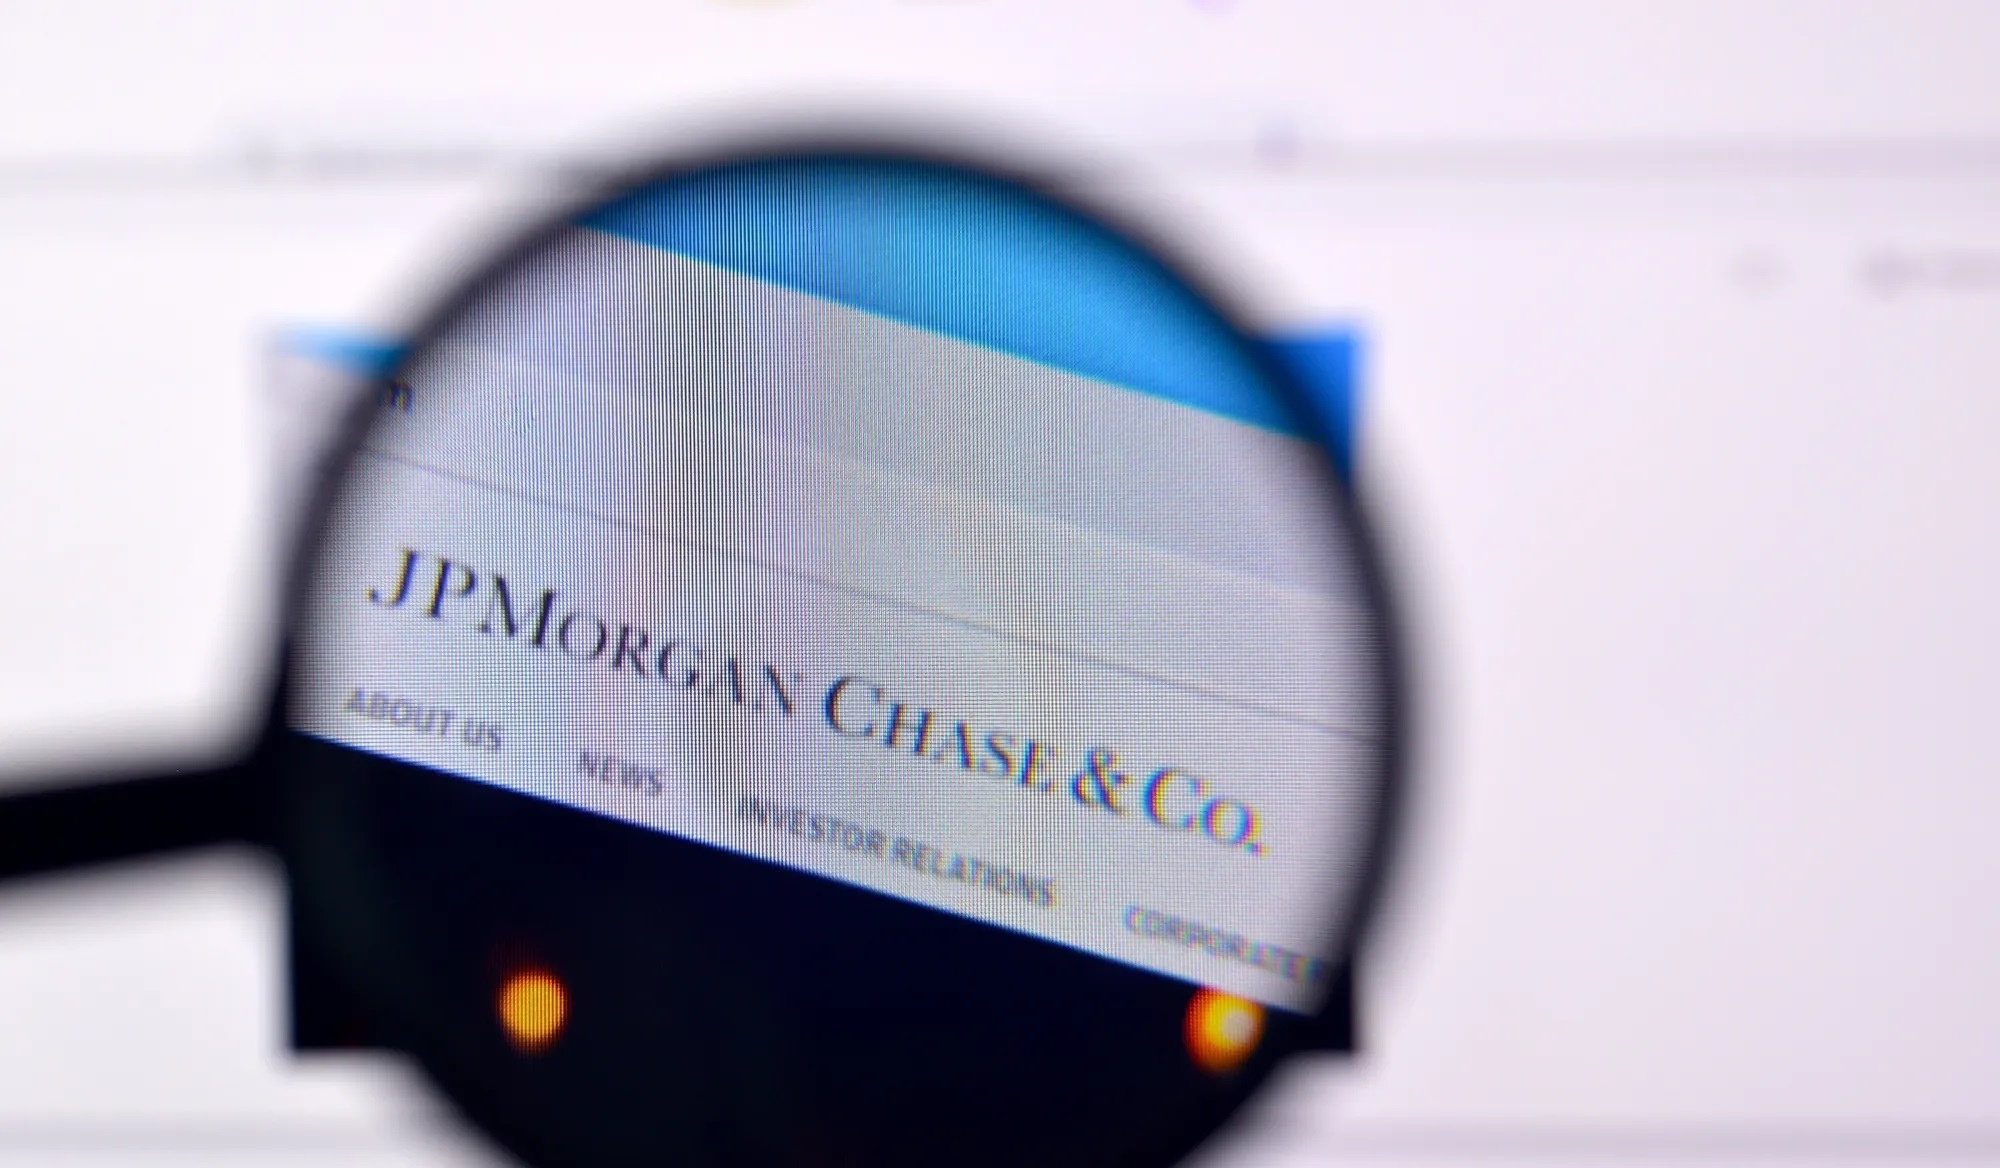 JPMorgan must pay USD 4 million to remove 47 million emails